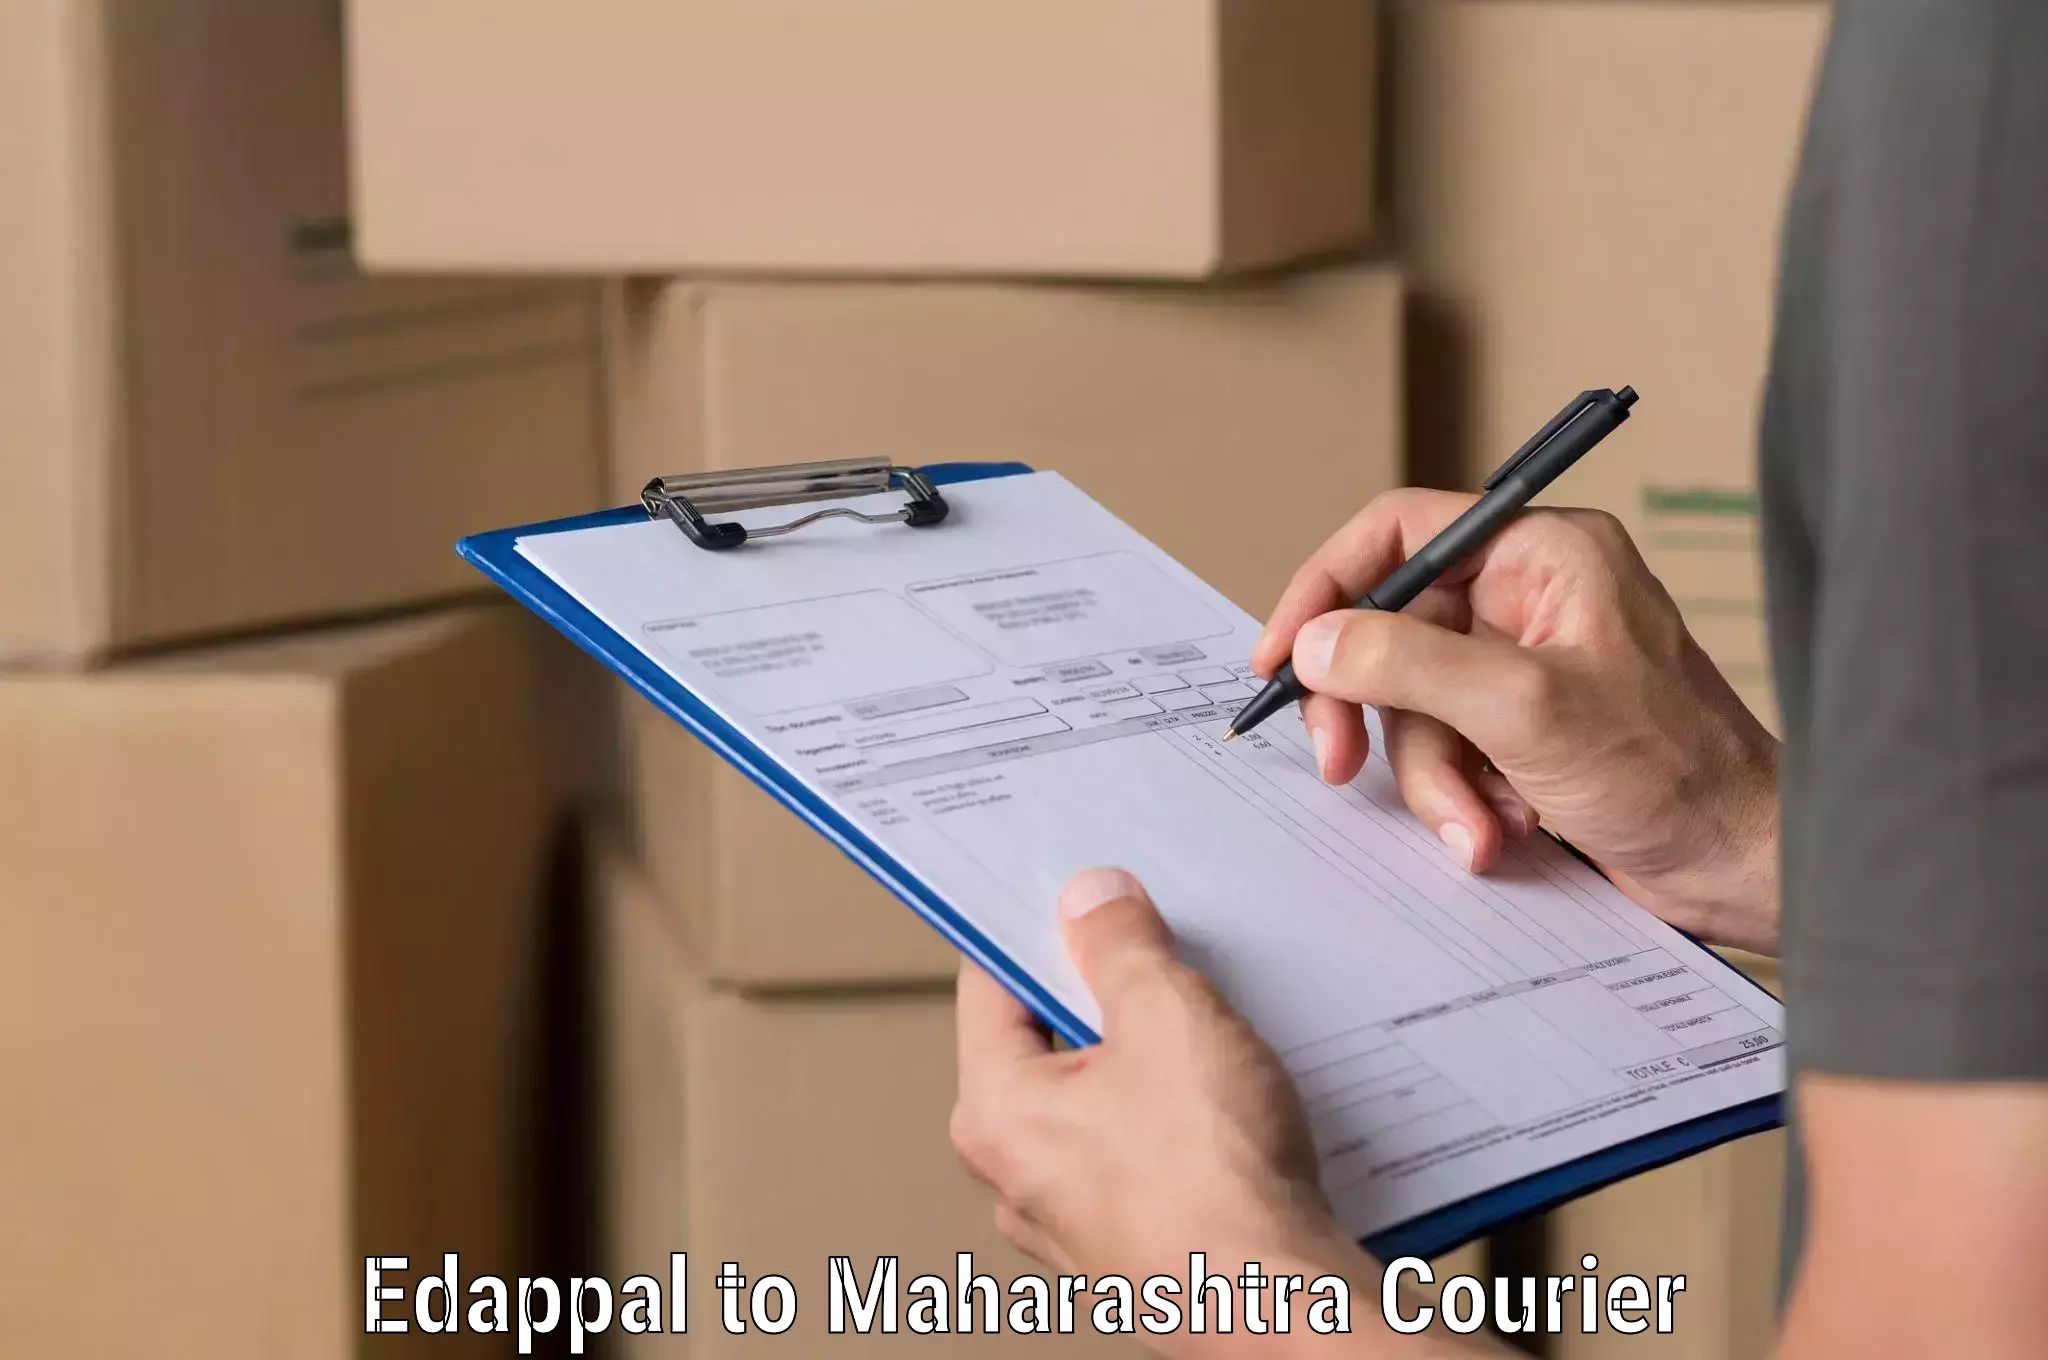 Supply chain delivery Edappal to Pune